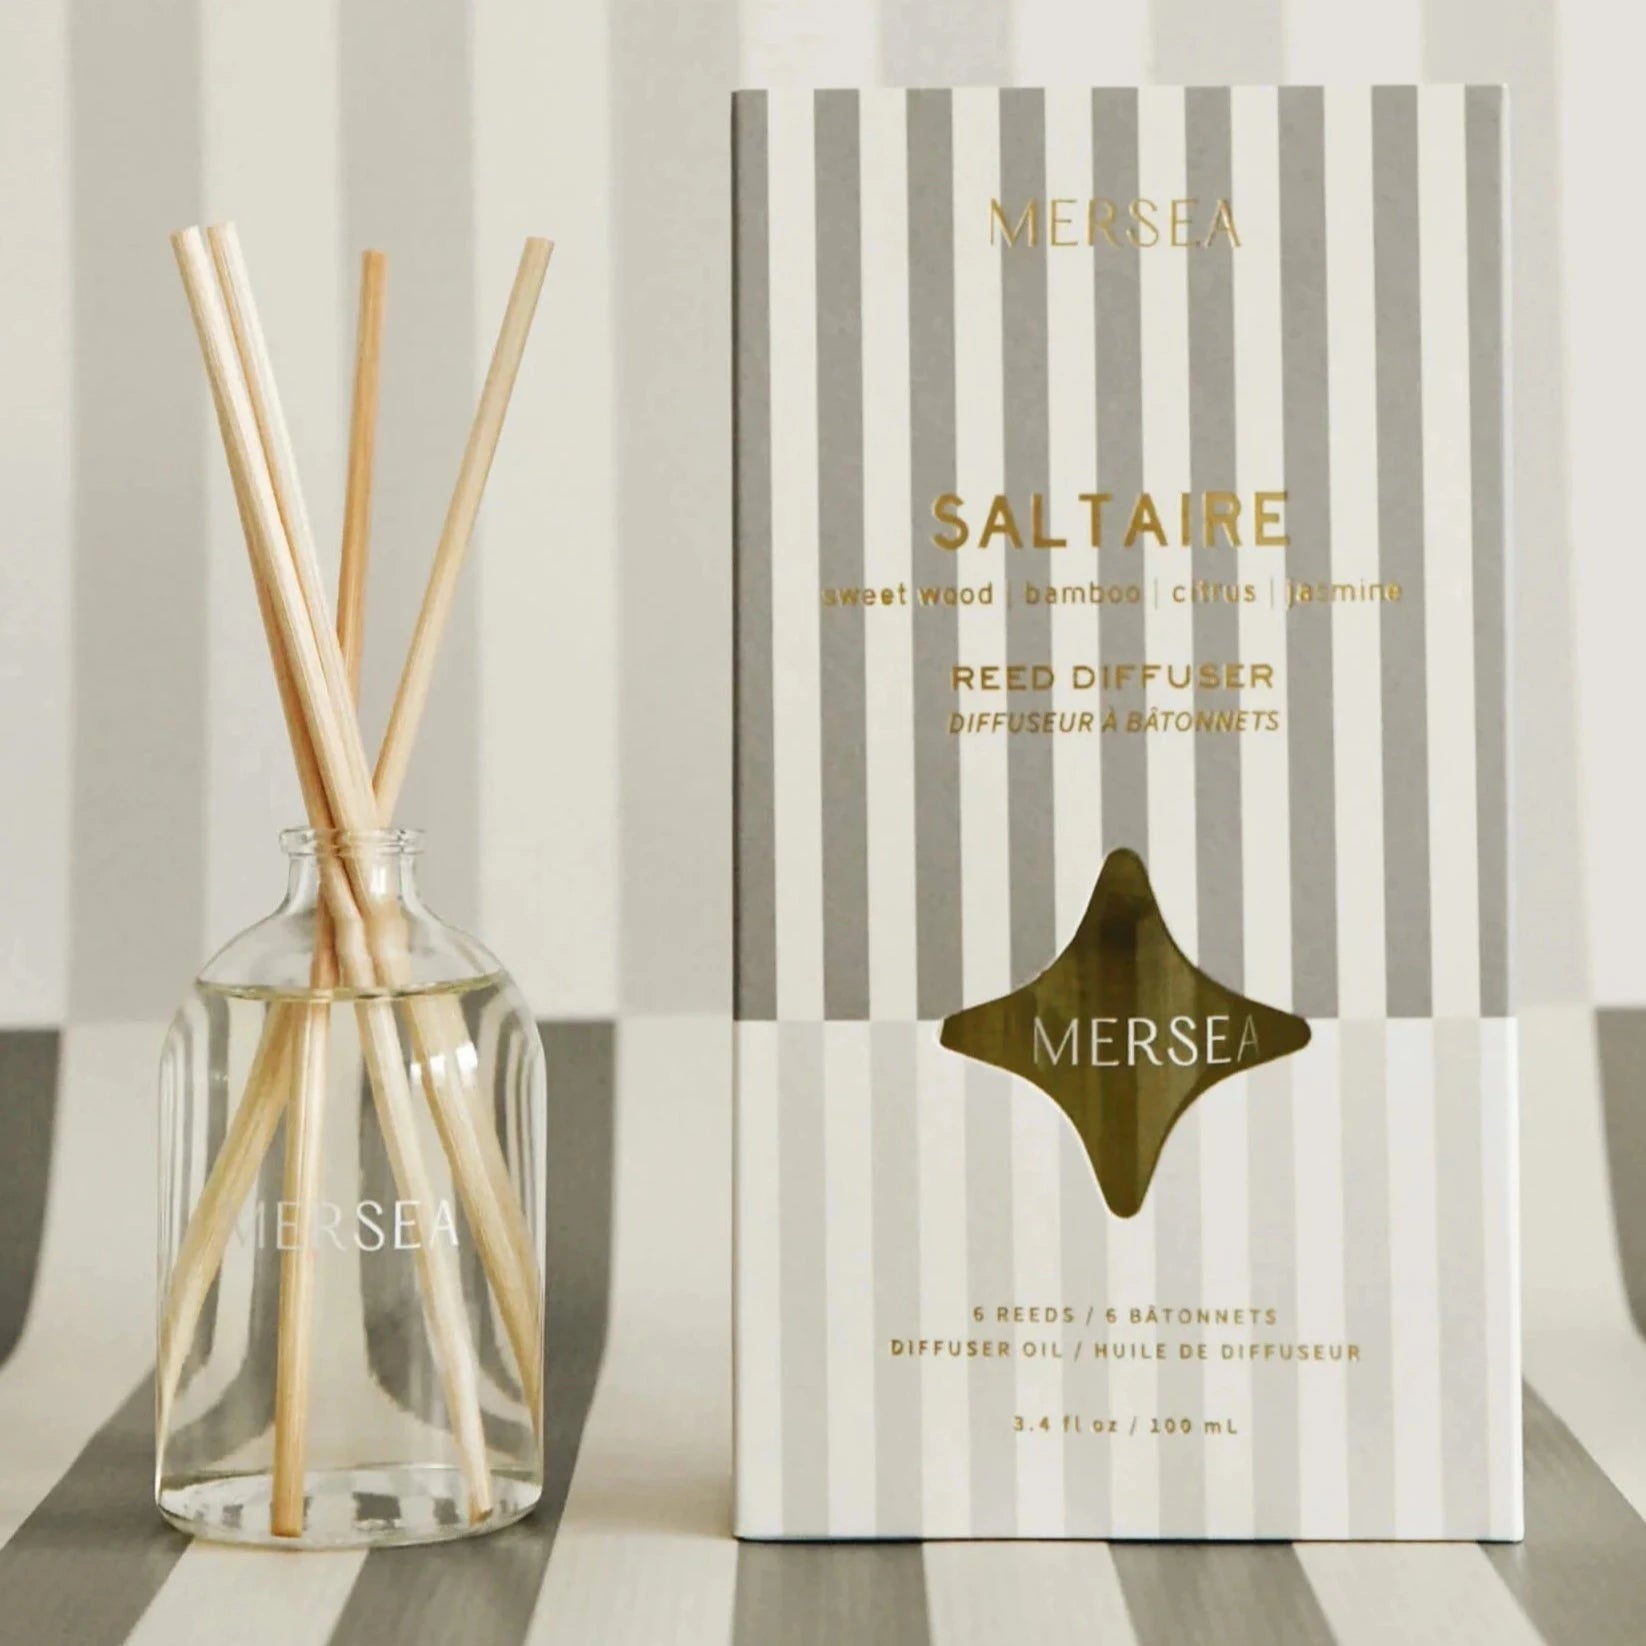 gray vertically striped box with gold text. next to it is reed diffuser